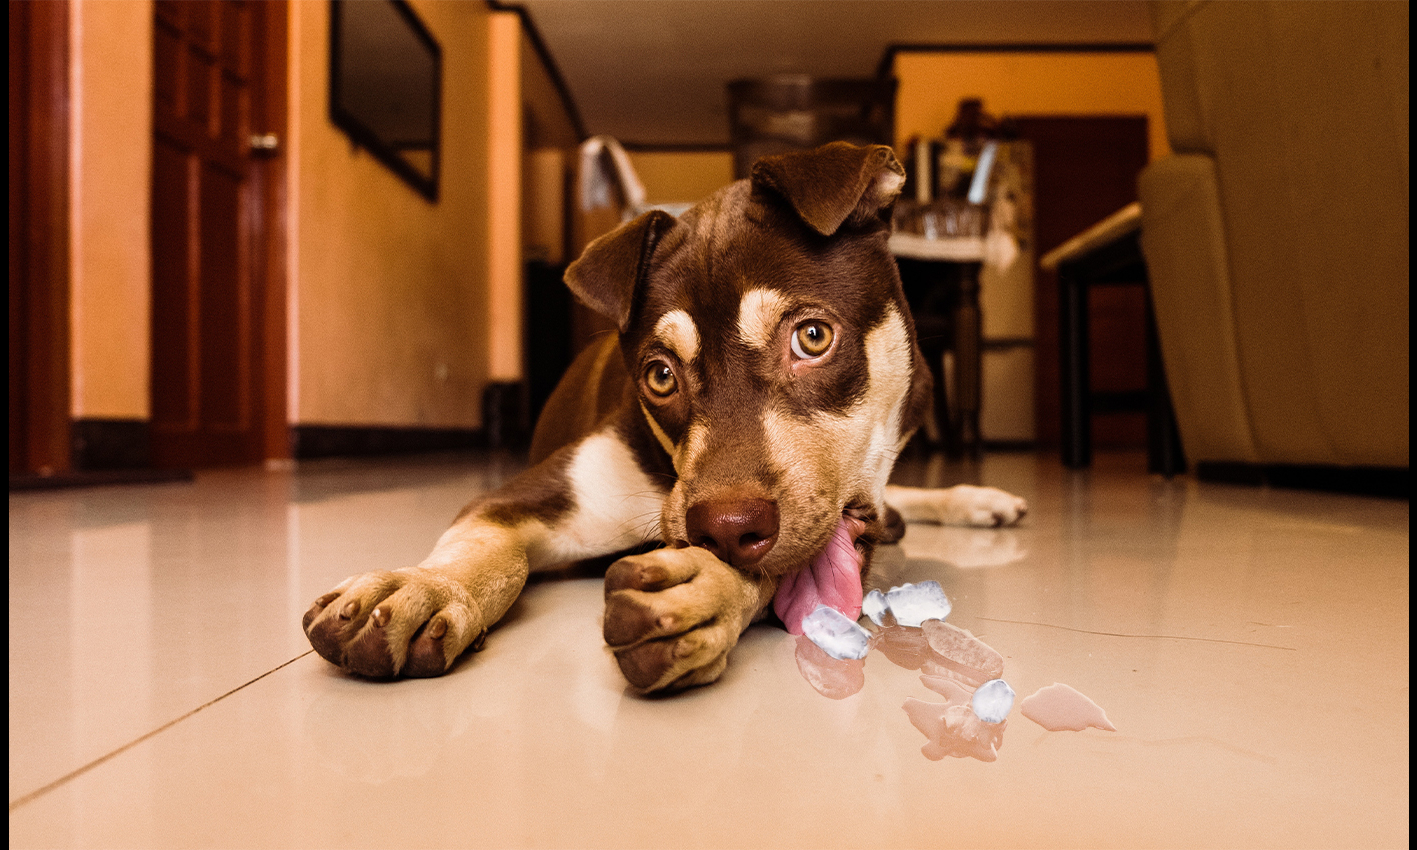 Giving dogs ice cubes to ward off the effects of extreme heat is dangerous.